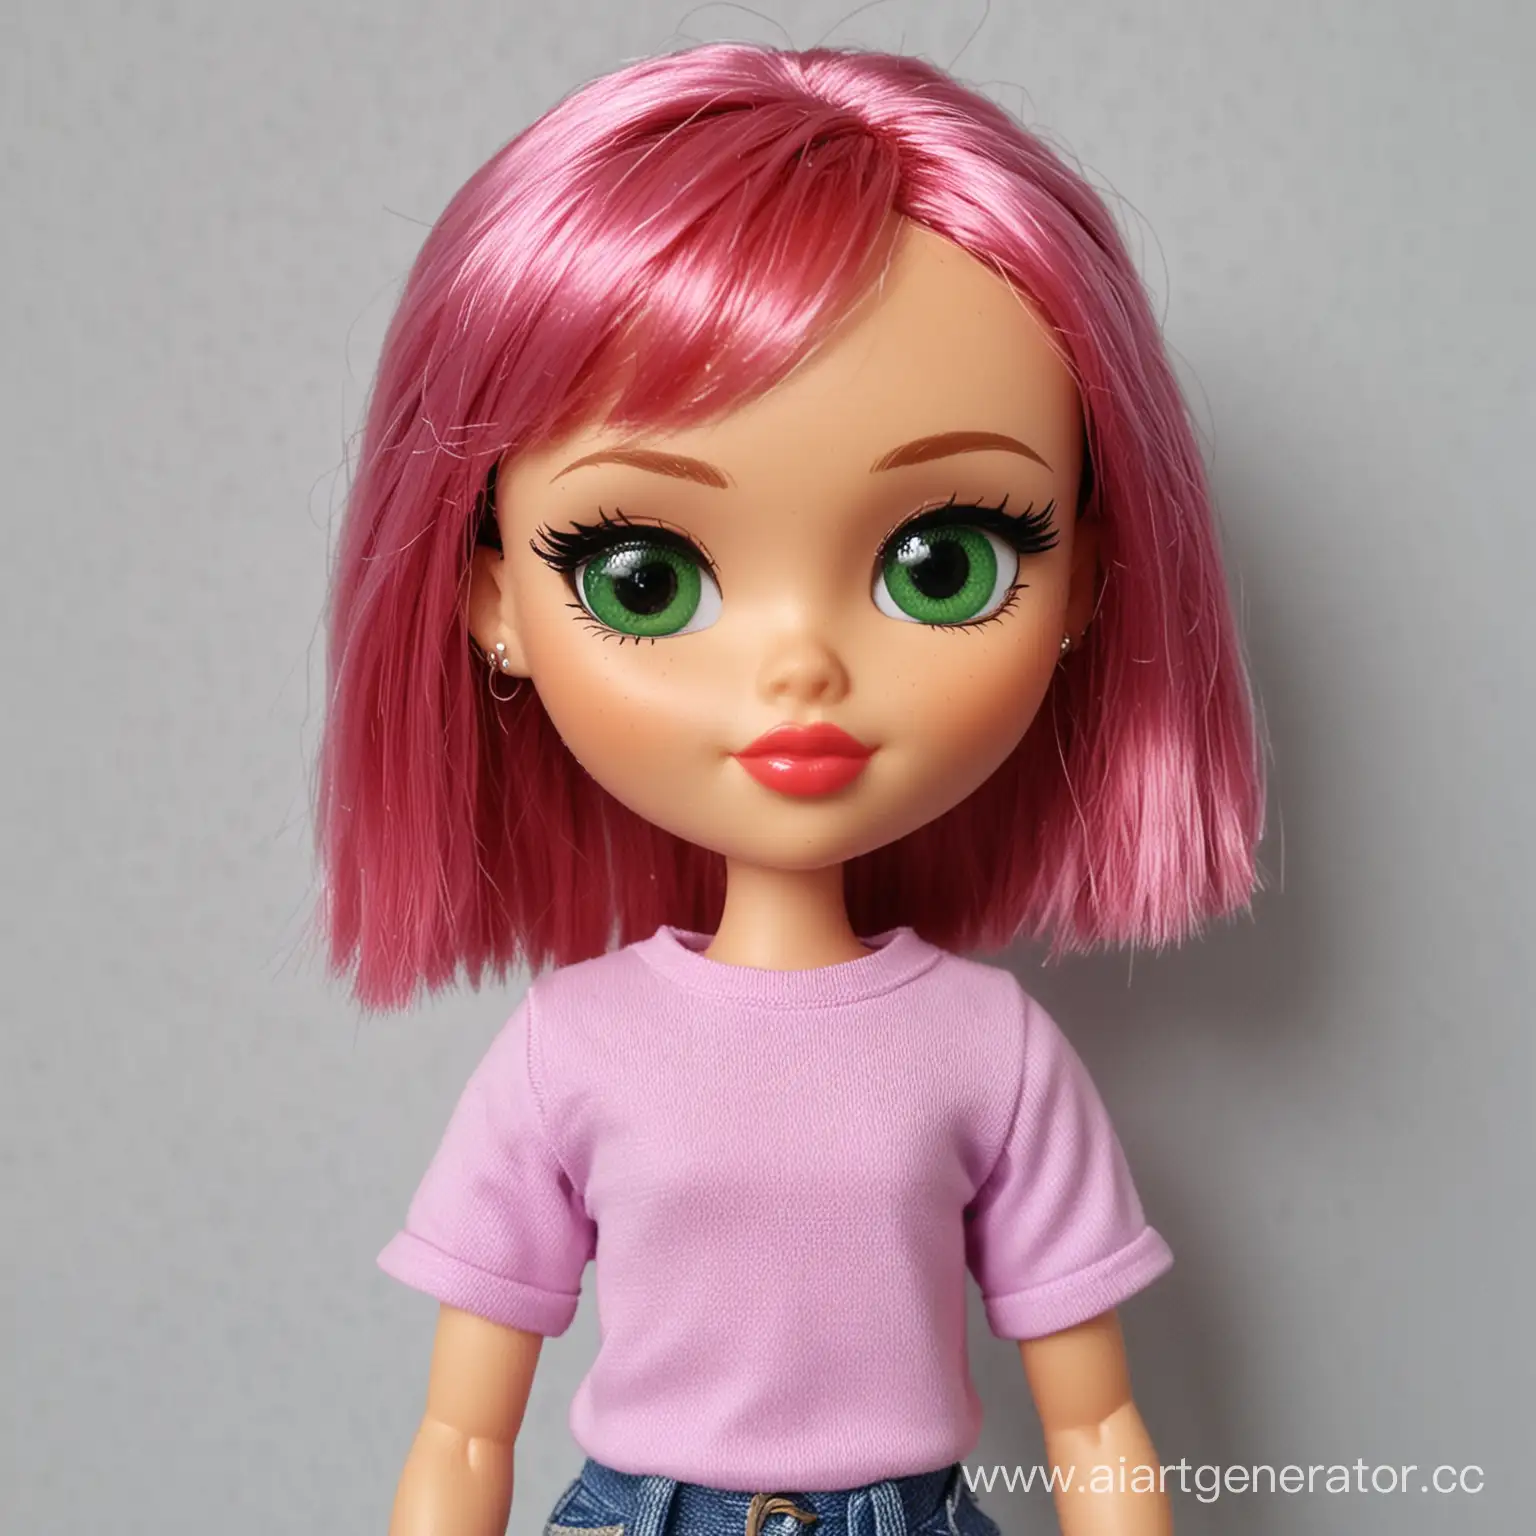 Chic-Bratz-Doll-with-Red-Bob-Green-Eyes-and-Cigarette